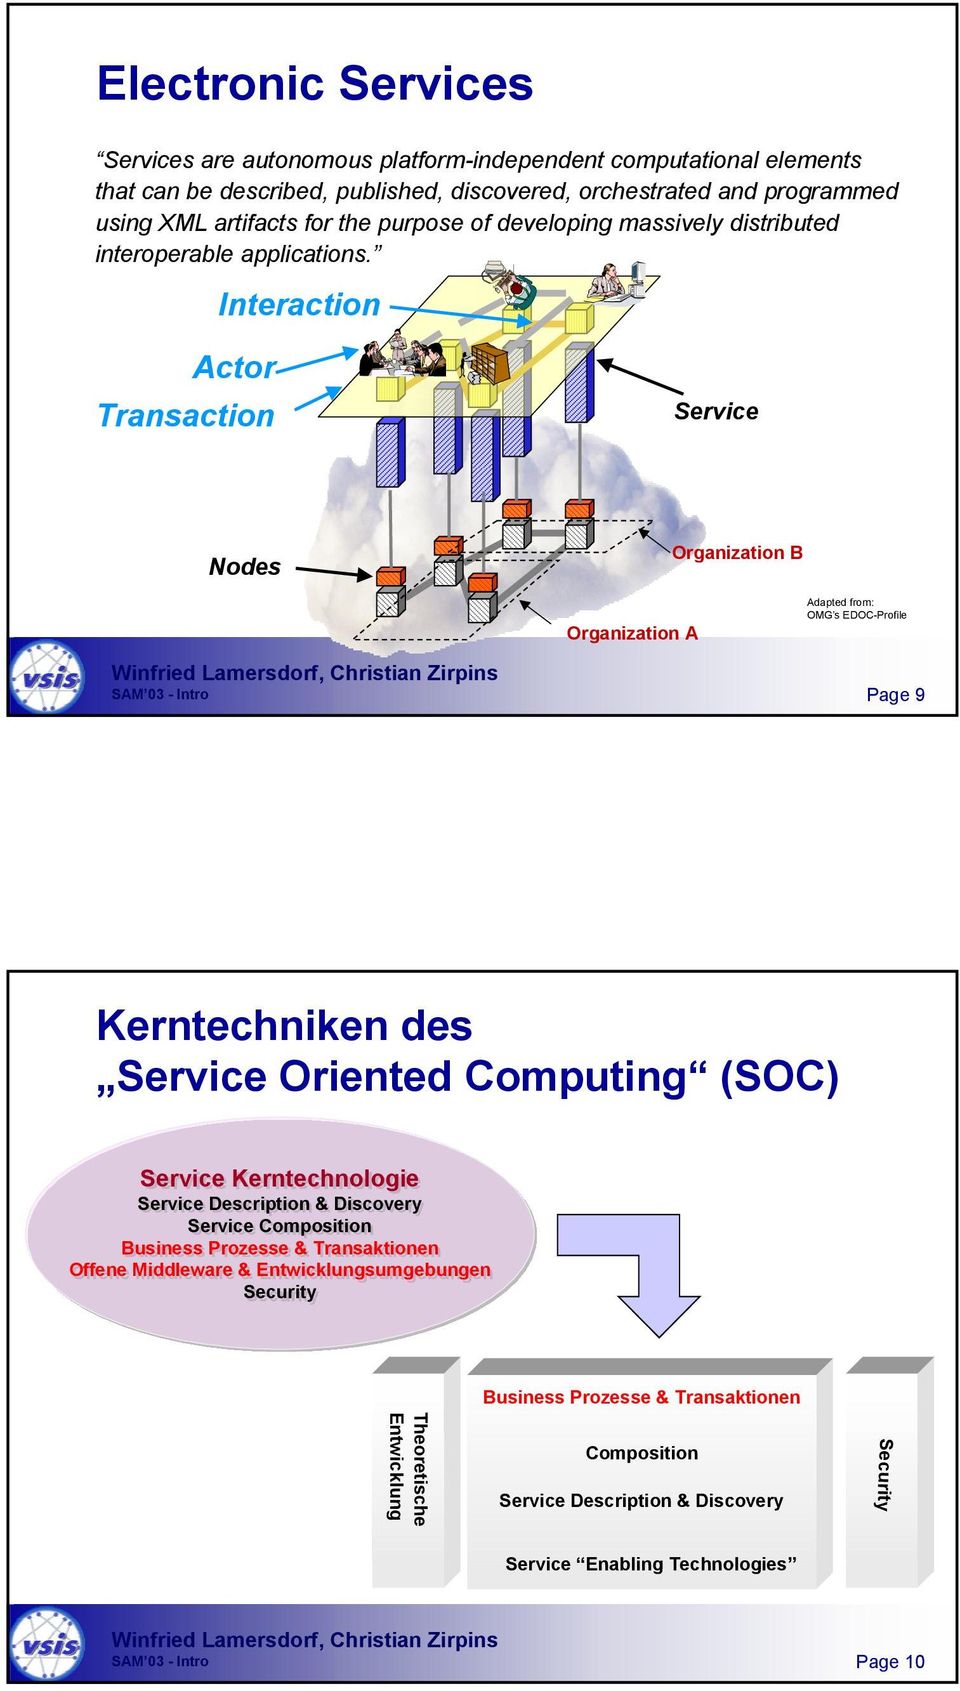 Interaction Actor Transaction Service Nodes Organization B Organization A Adapted from: OMG s EDOC-Profile Page 9 Kerntechniken des Service Oriented Computing (SOC) Service